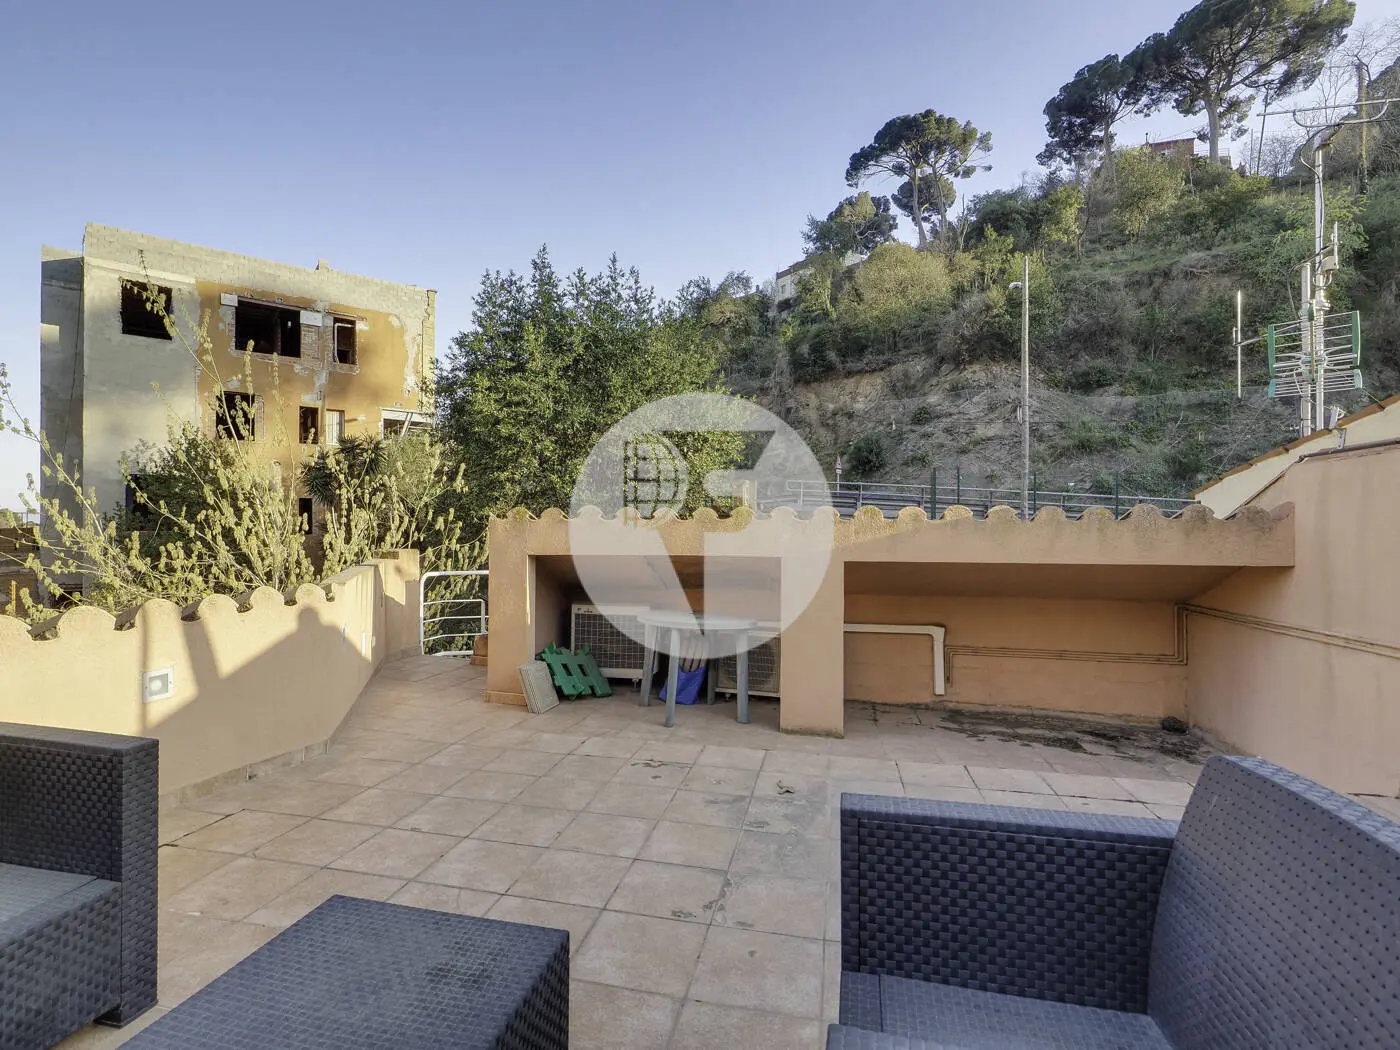 Fantastic 185m² house with garden and terrace in the Sarrià neighborhood of Barcelona 50